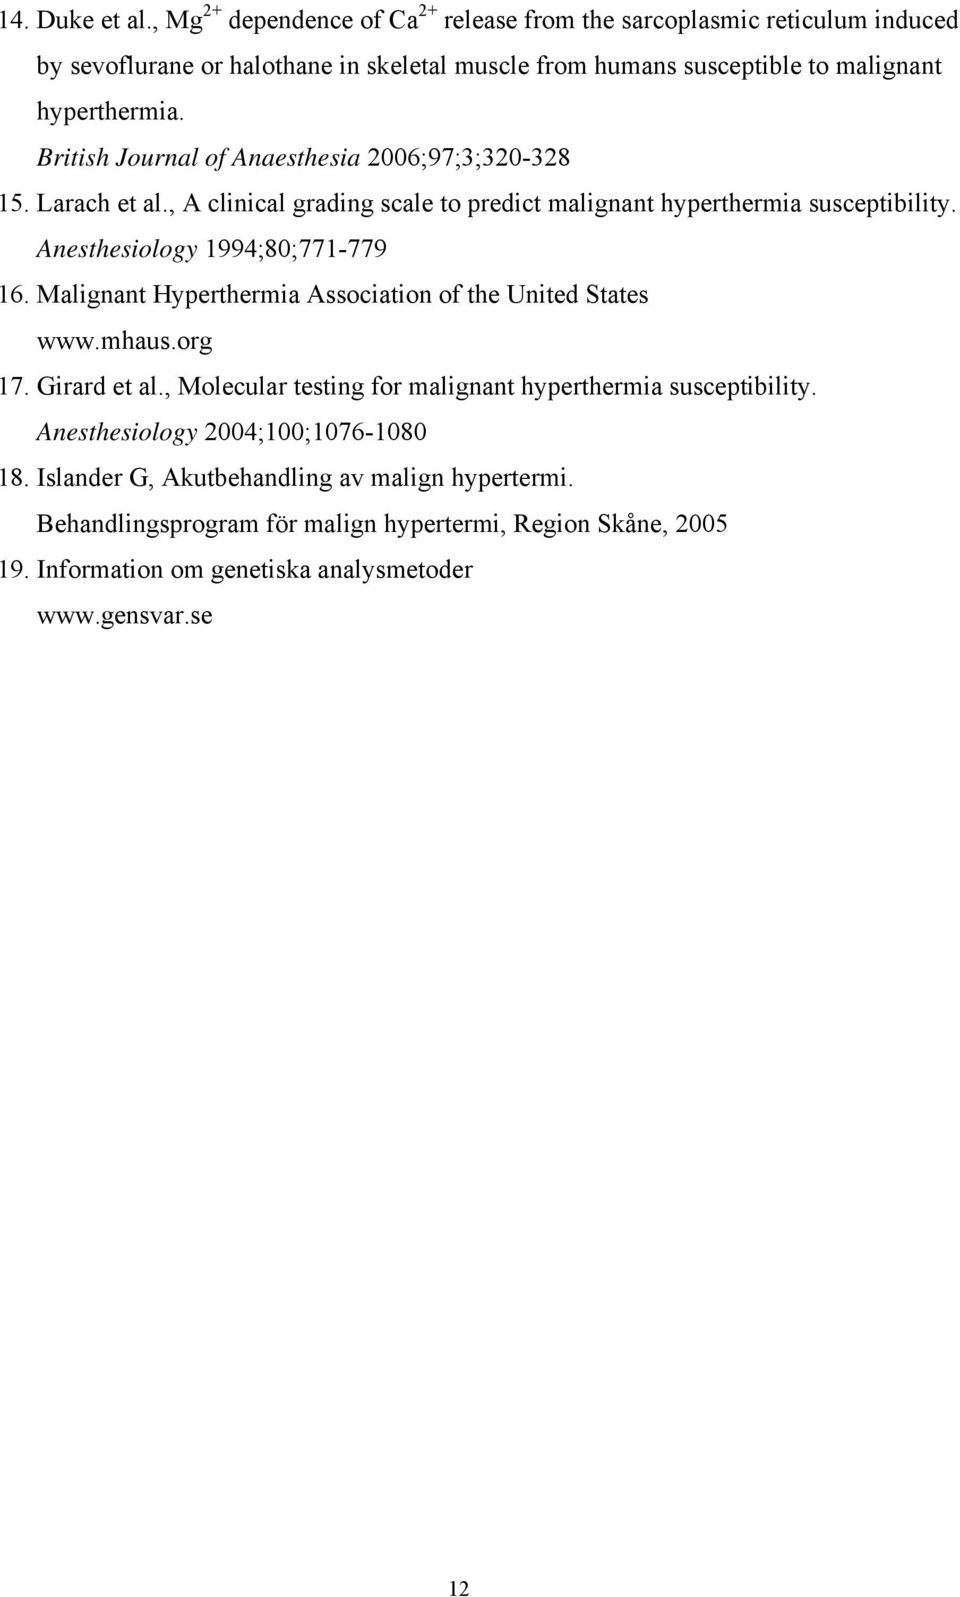 British Journal of Anaesthesia 2006;97;3;320-328 15. Larach et al., A clinical grading scale to predict malignant hyperthermia susceptibility. Anesthesiology 1994;80;771-779 16.